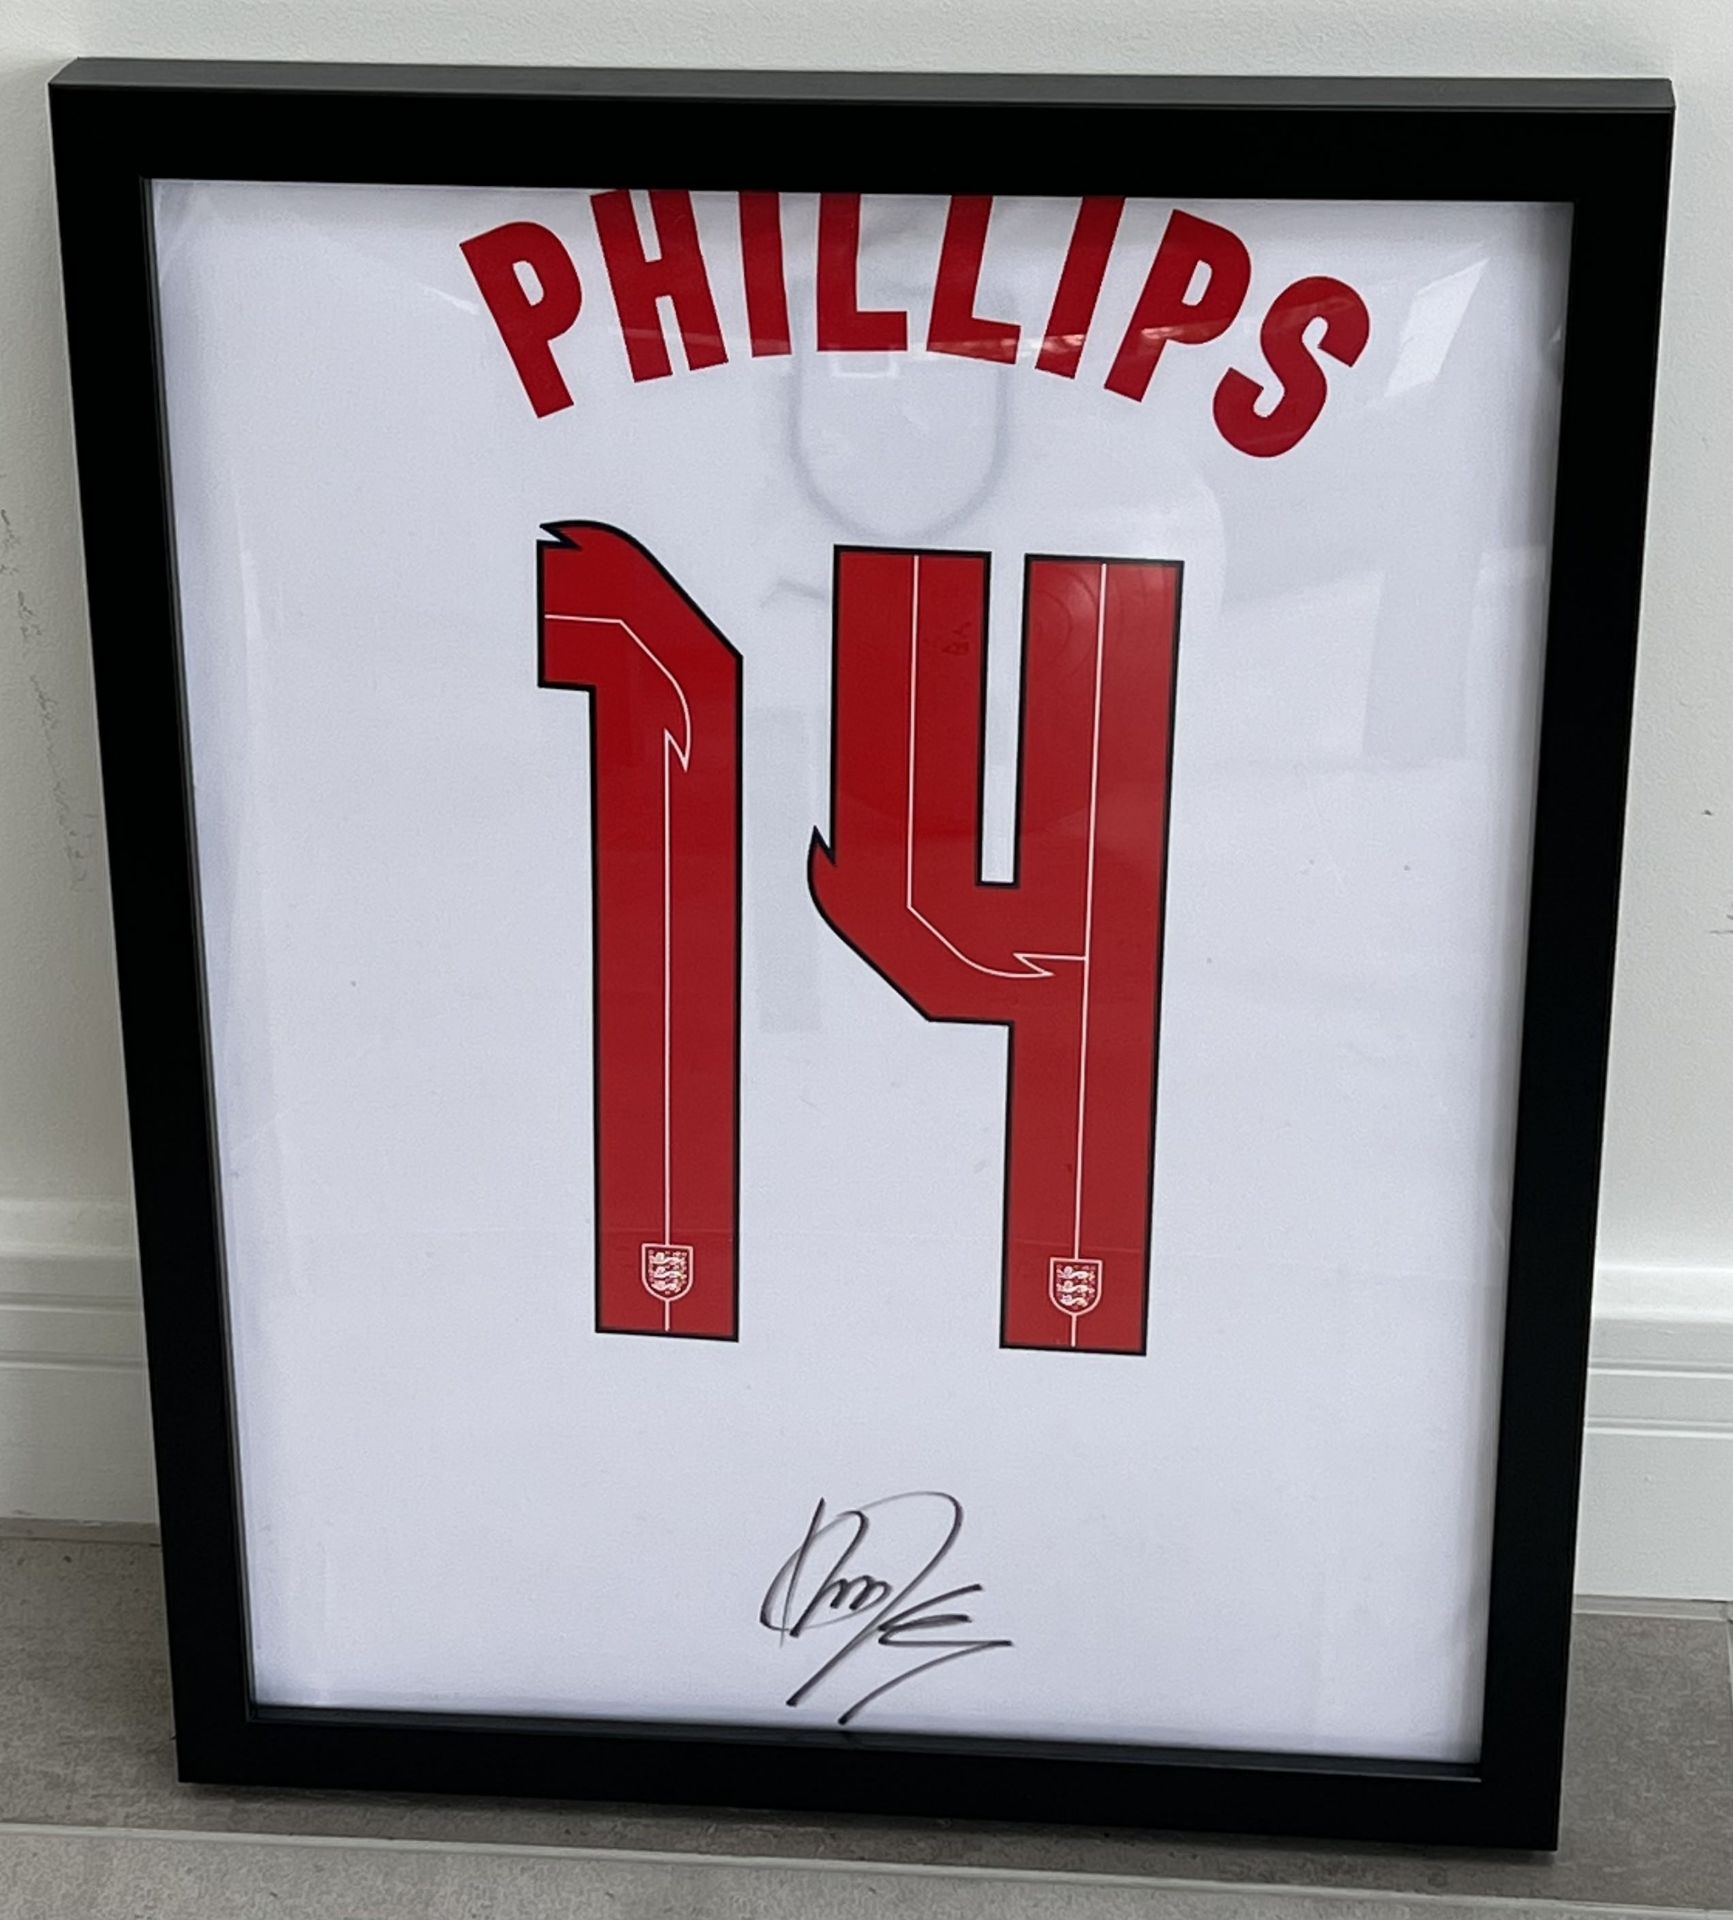 Authentic Kalvin Phillips hand signed England football shirt presentation. The shirt is displayed in